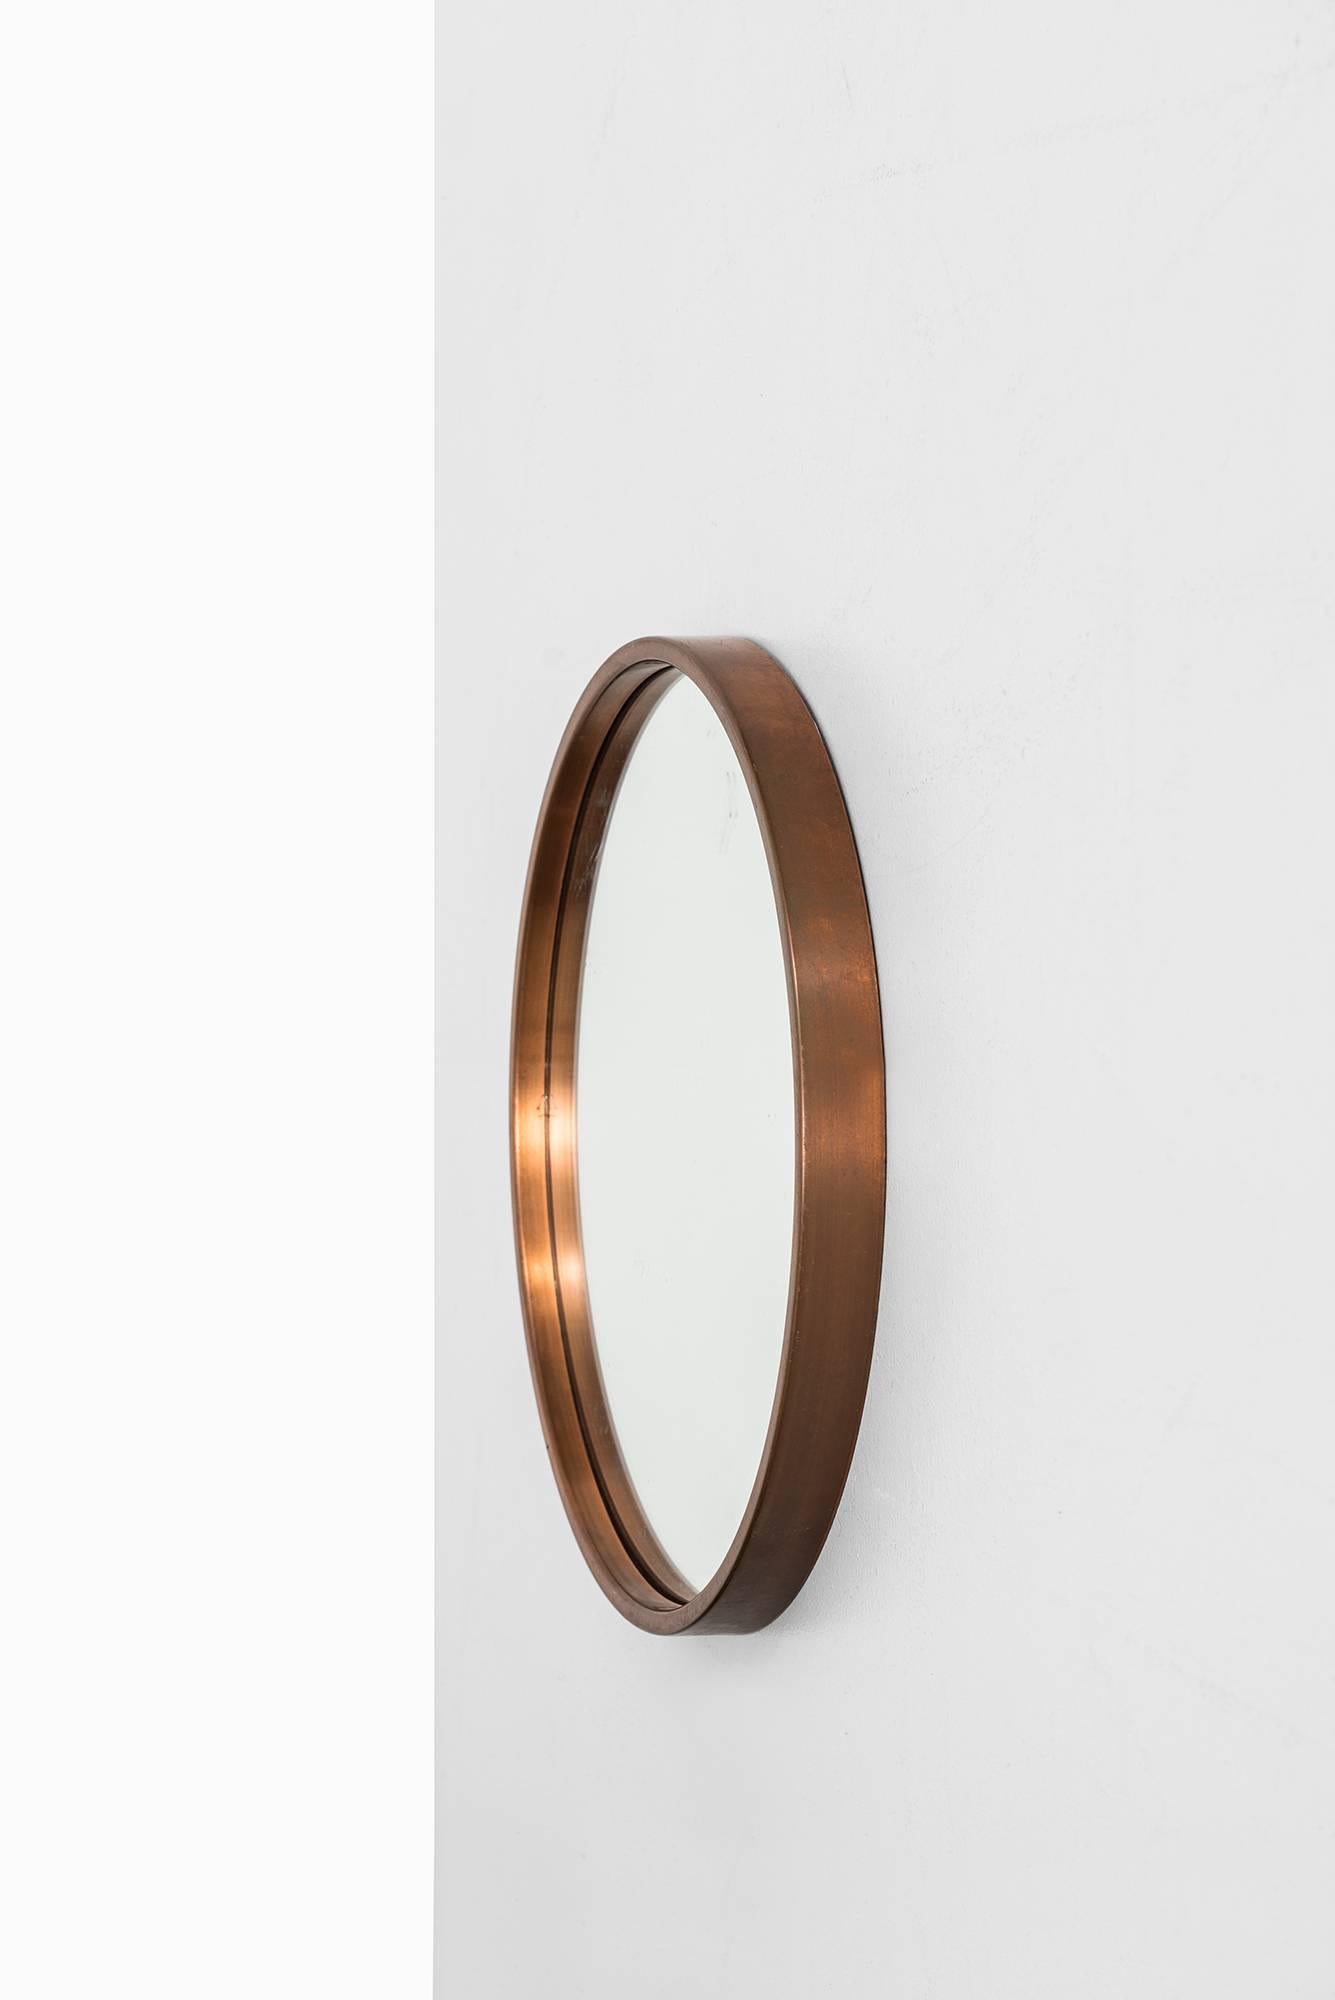 Round mirror in copper. Produced by Glas mäster in Markaryd, Sweden.